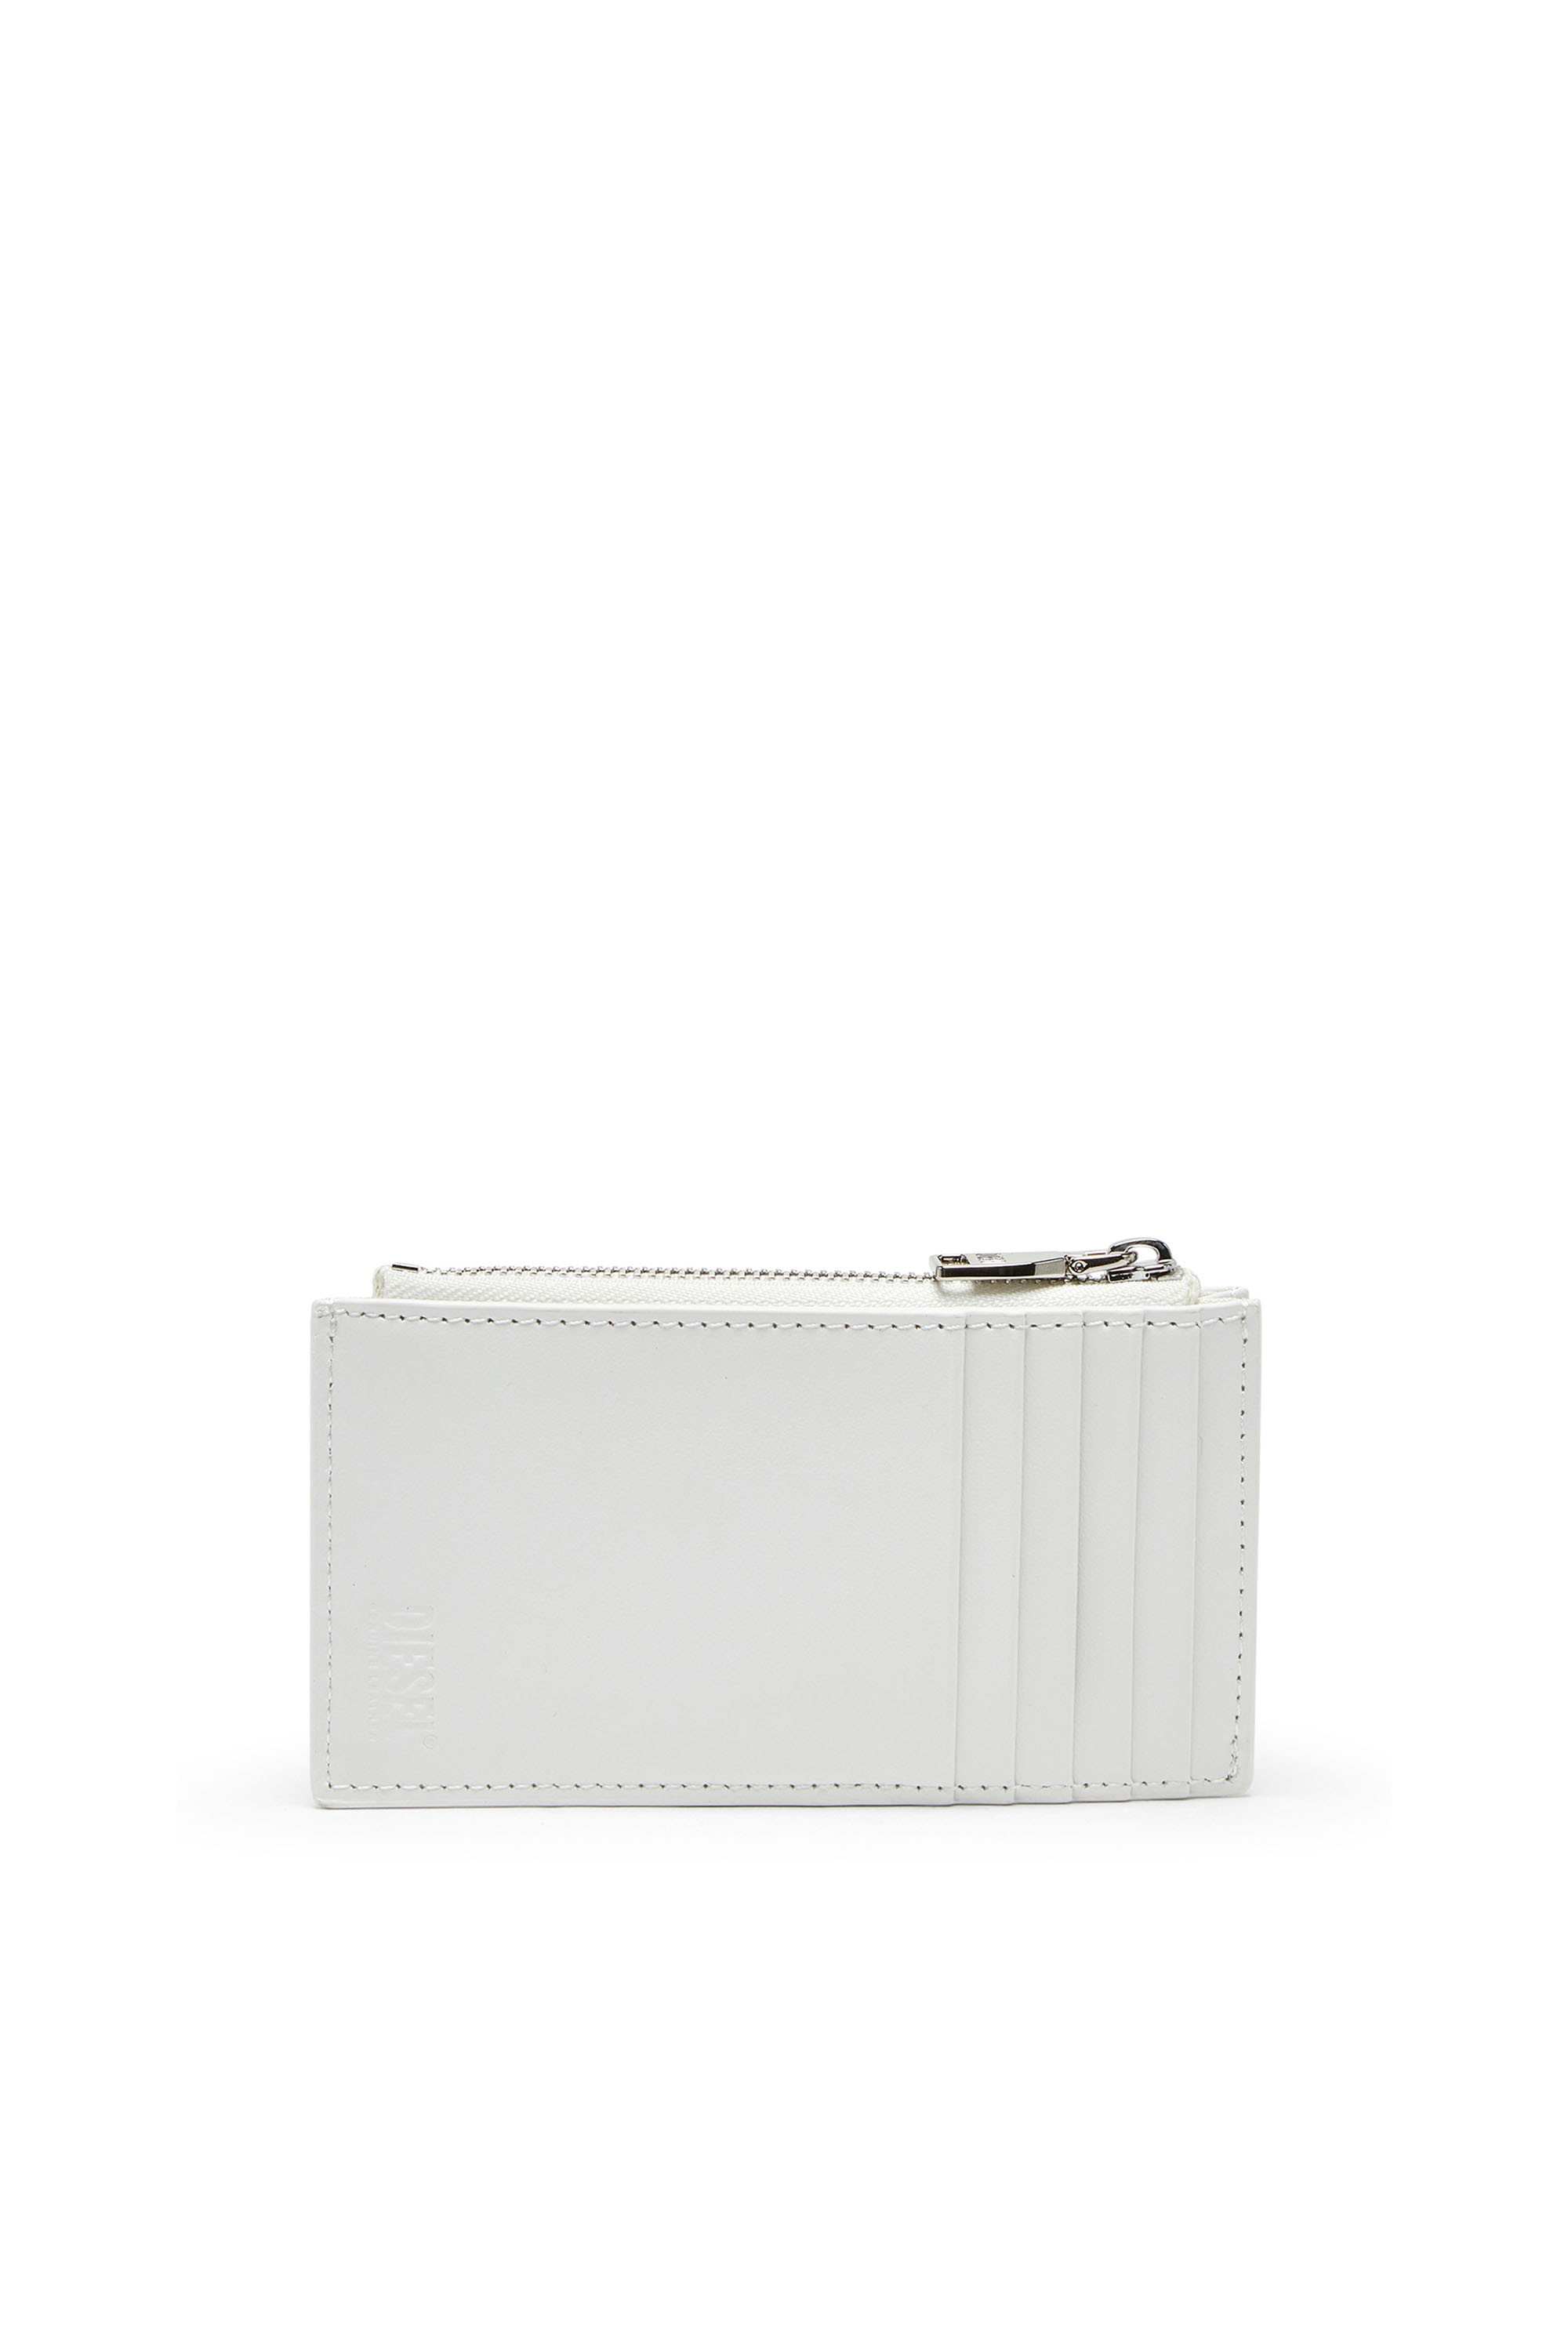 Diesel - PLAY CARD HOLDER III, Female Card holder in glossy leather in ホワイト - Image 2